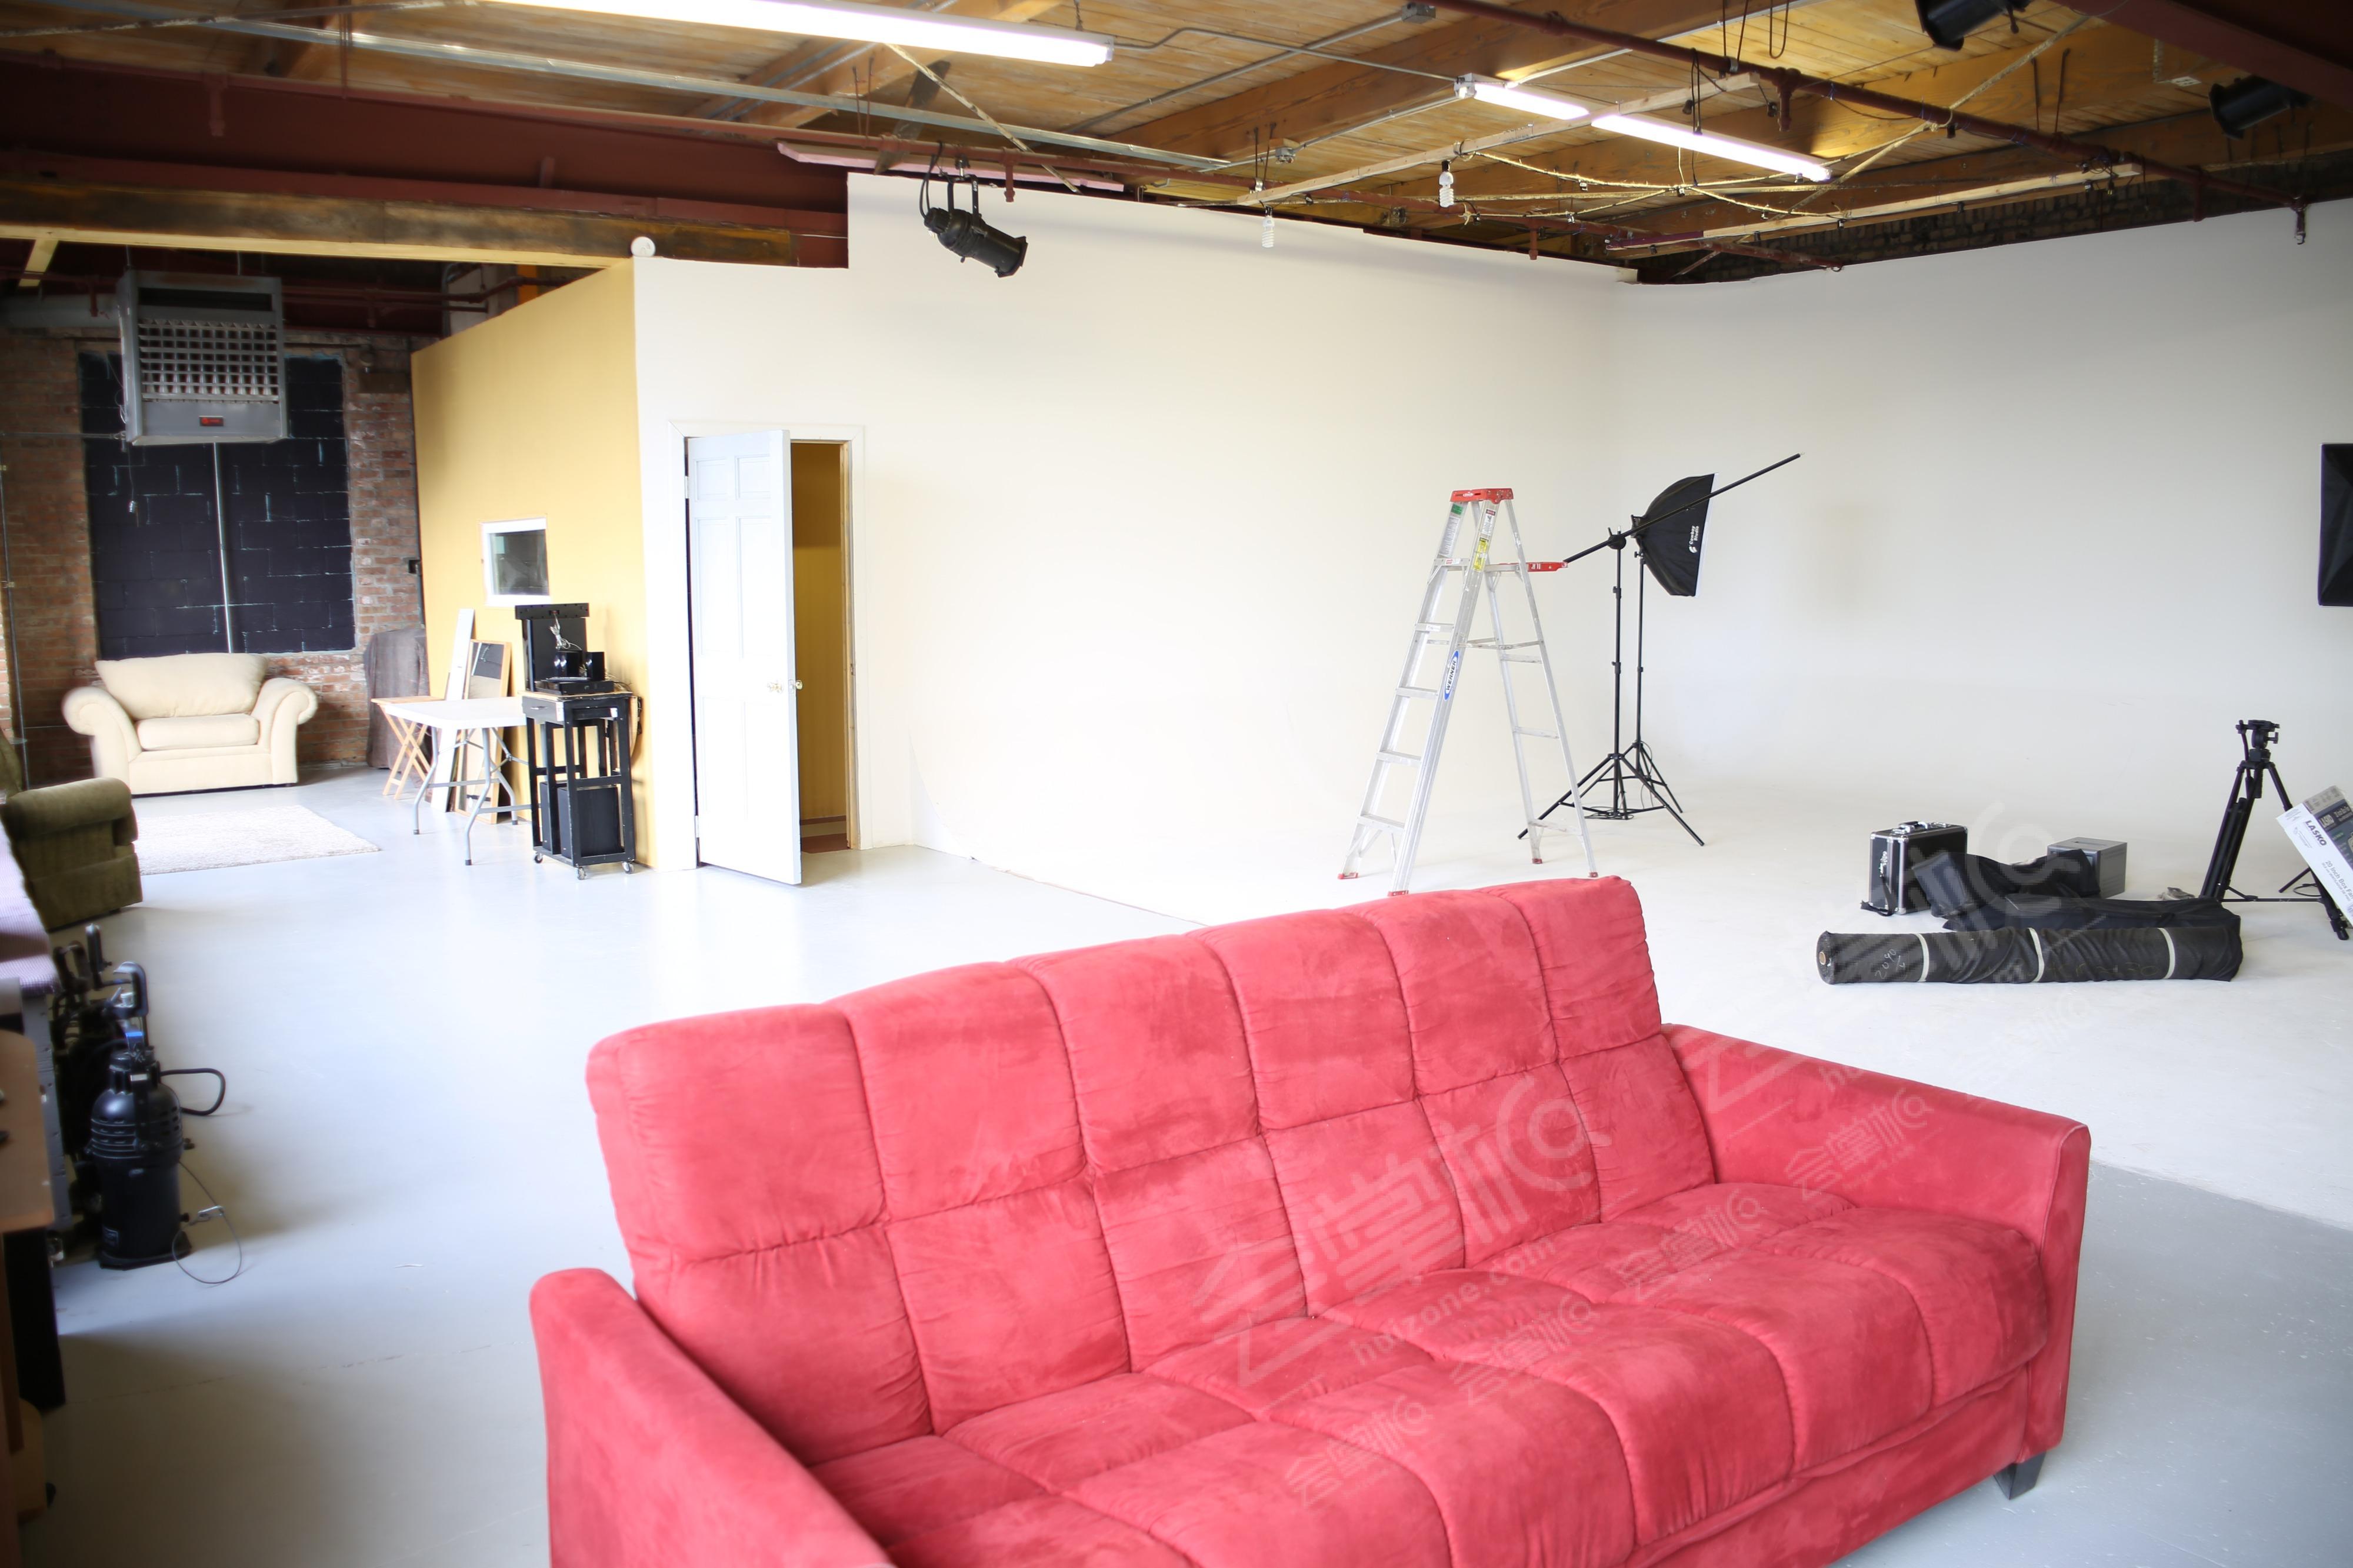 Photography and Video Loft Studio with Great Natural Lighting